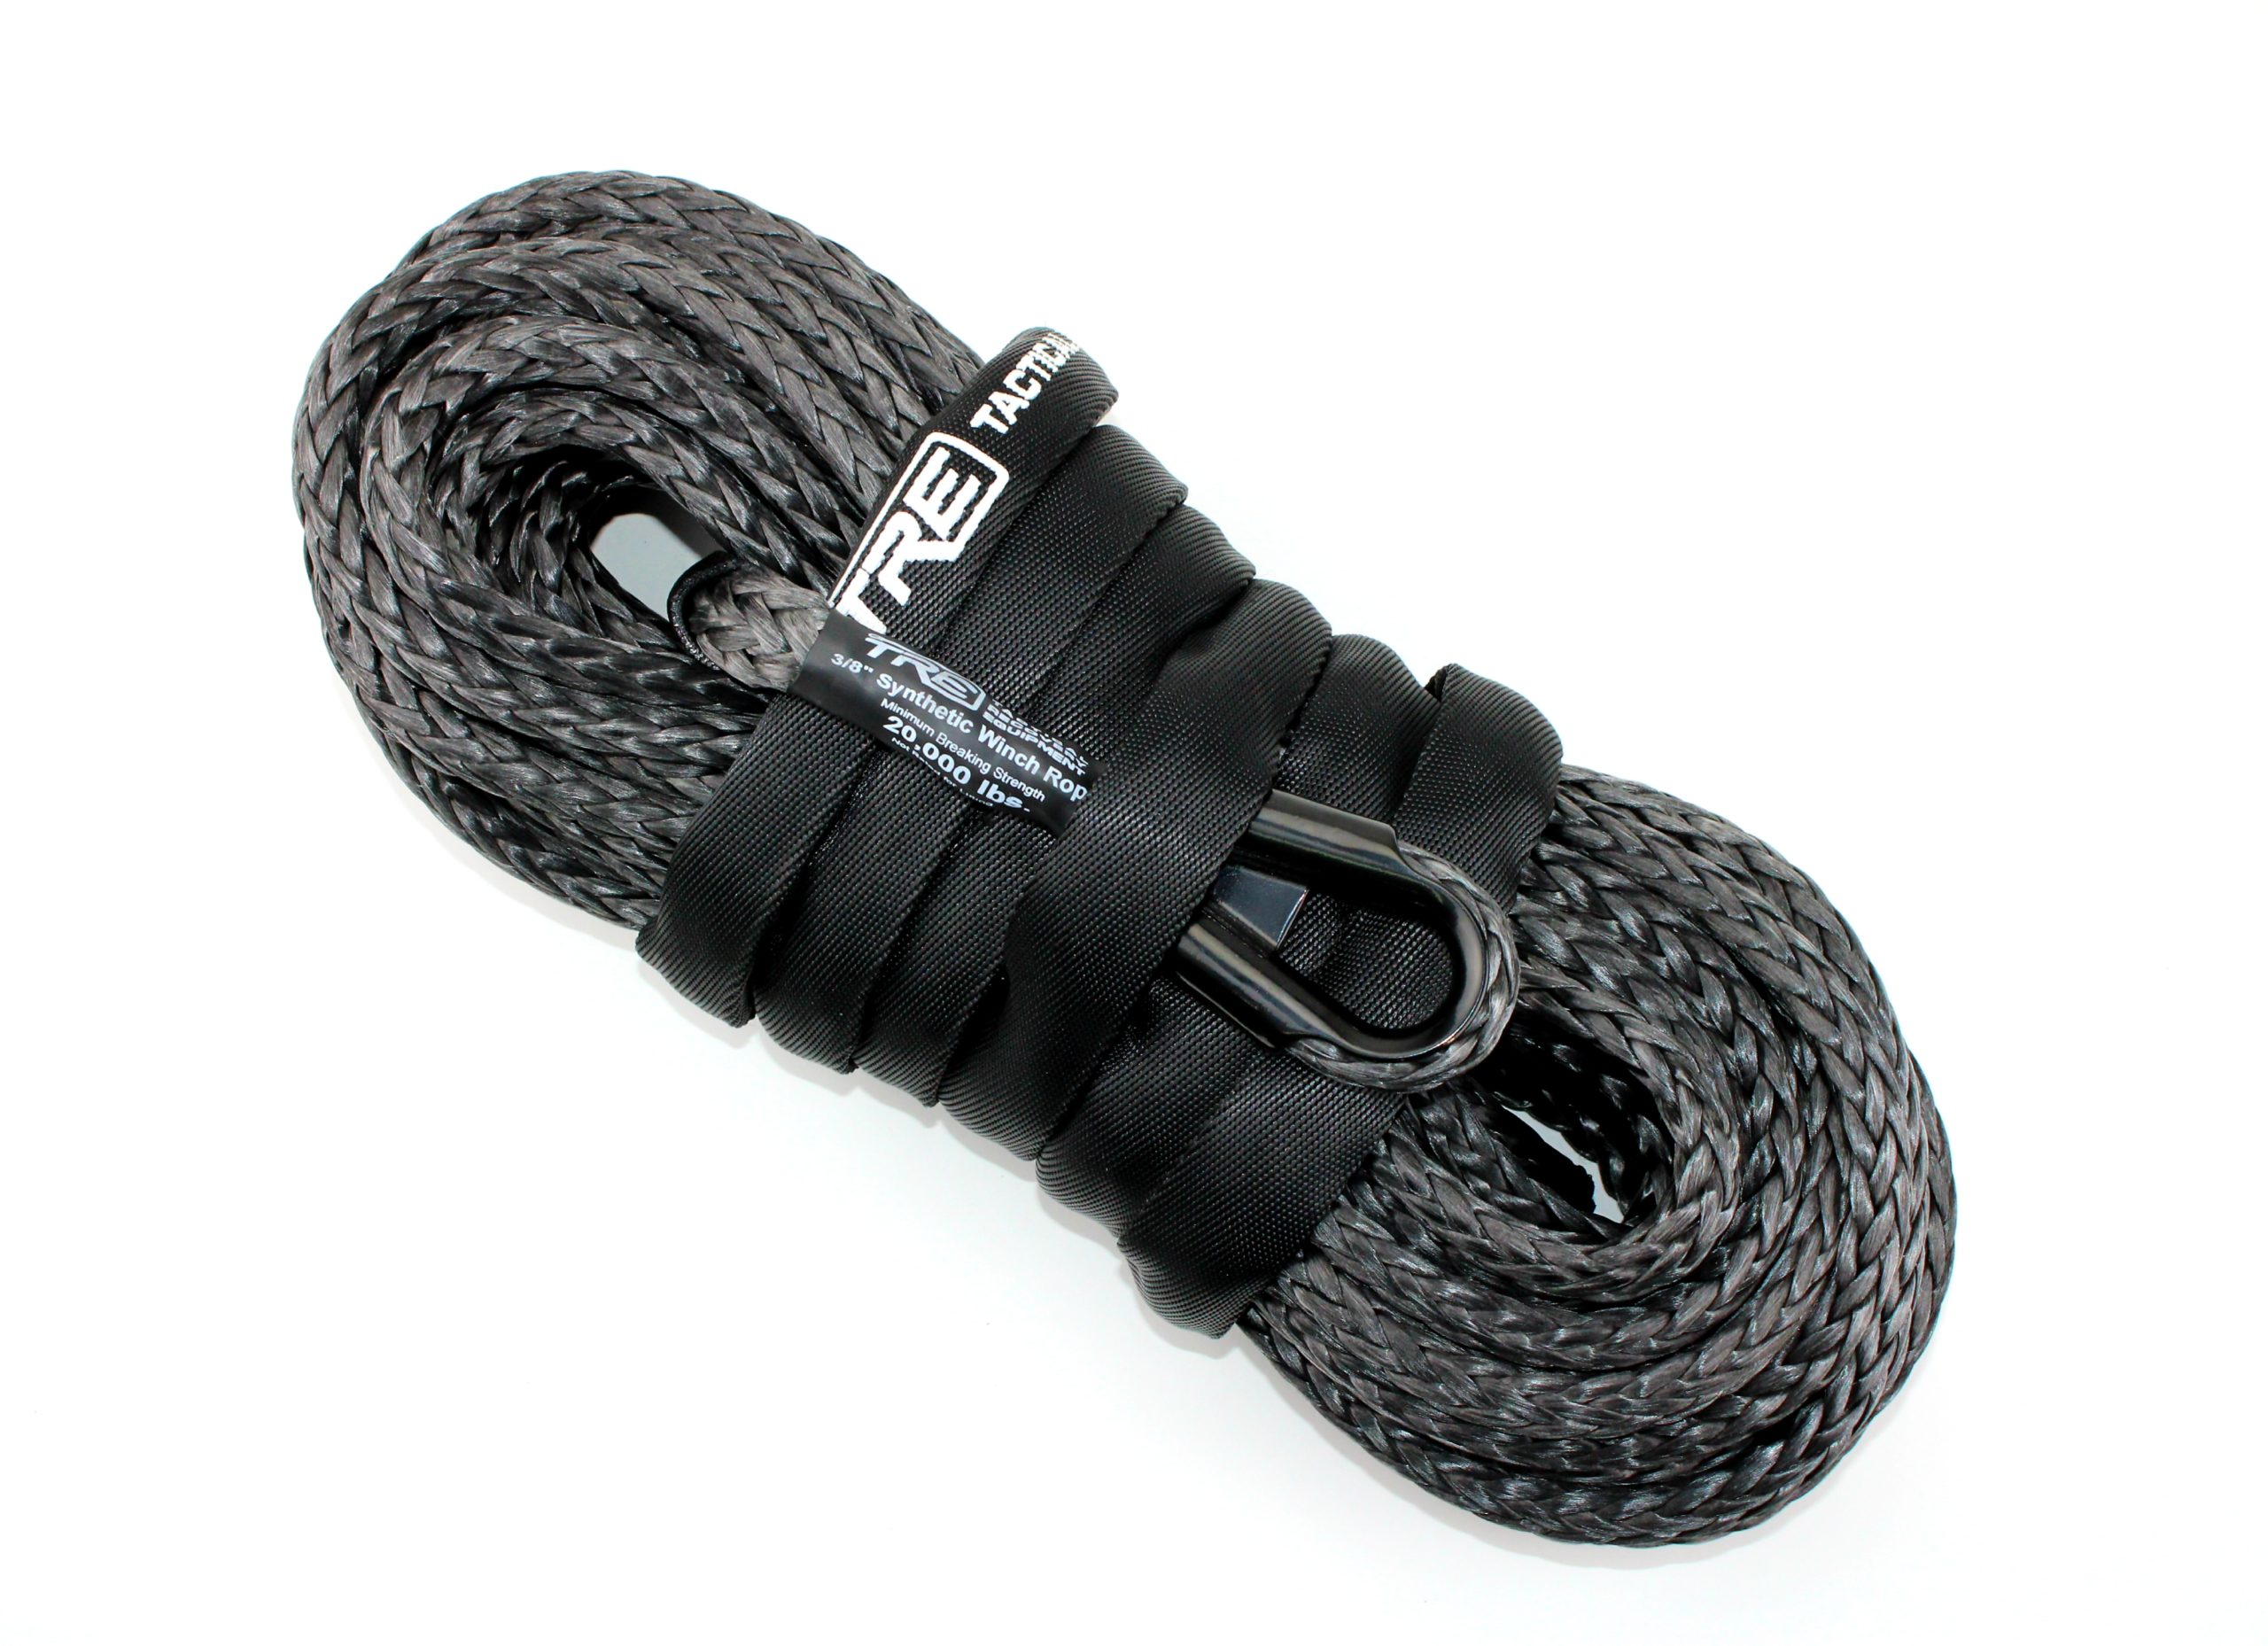 3/8 Synthetic Winch Rope - 20,000 lb. Breaking Strength - Replacement Winch Rope for 6,000 - 12,000 lb. Winches (Winch Rope Color: Black, Winch Rope L